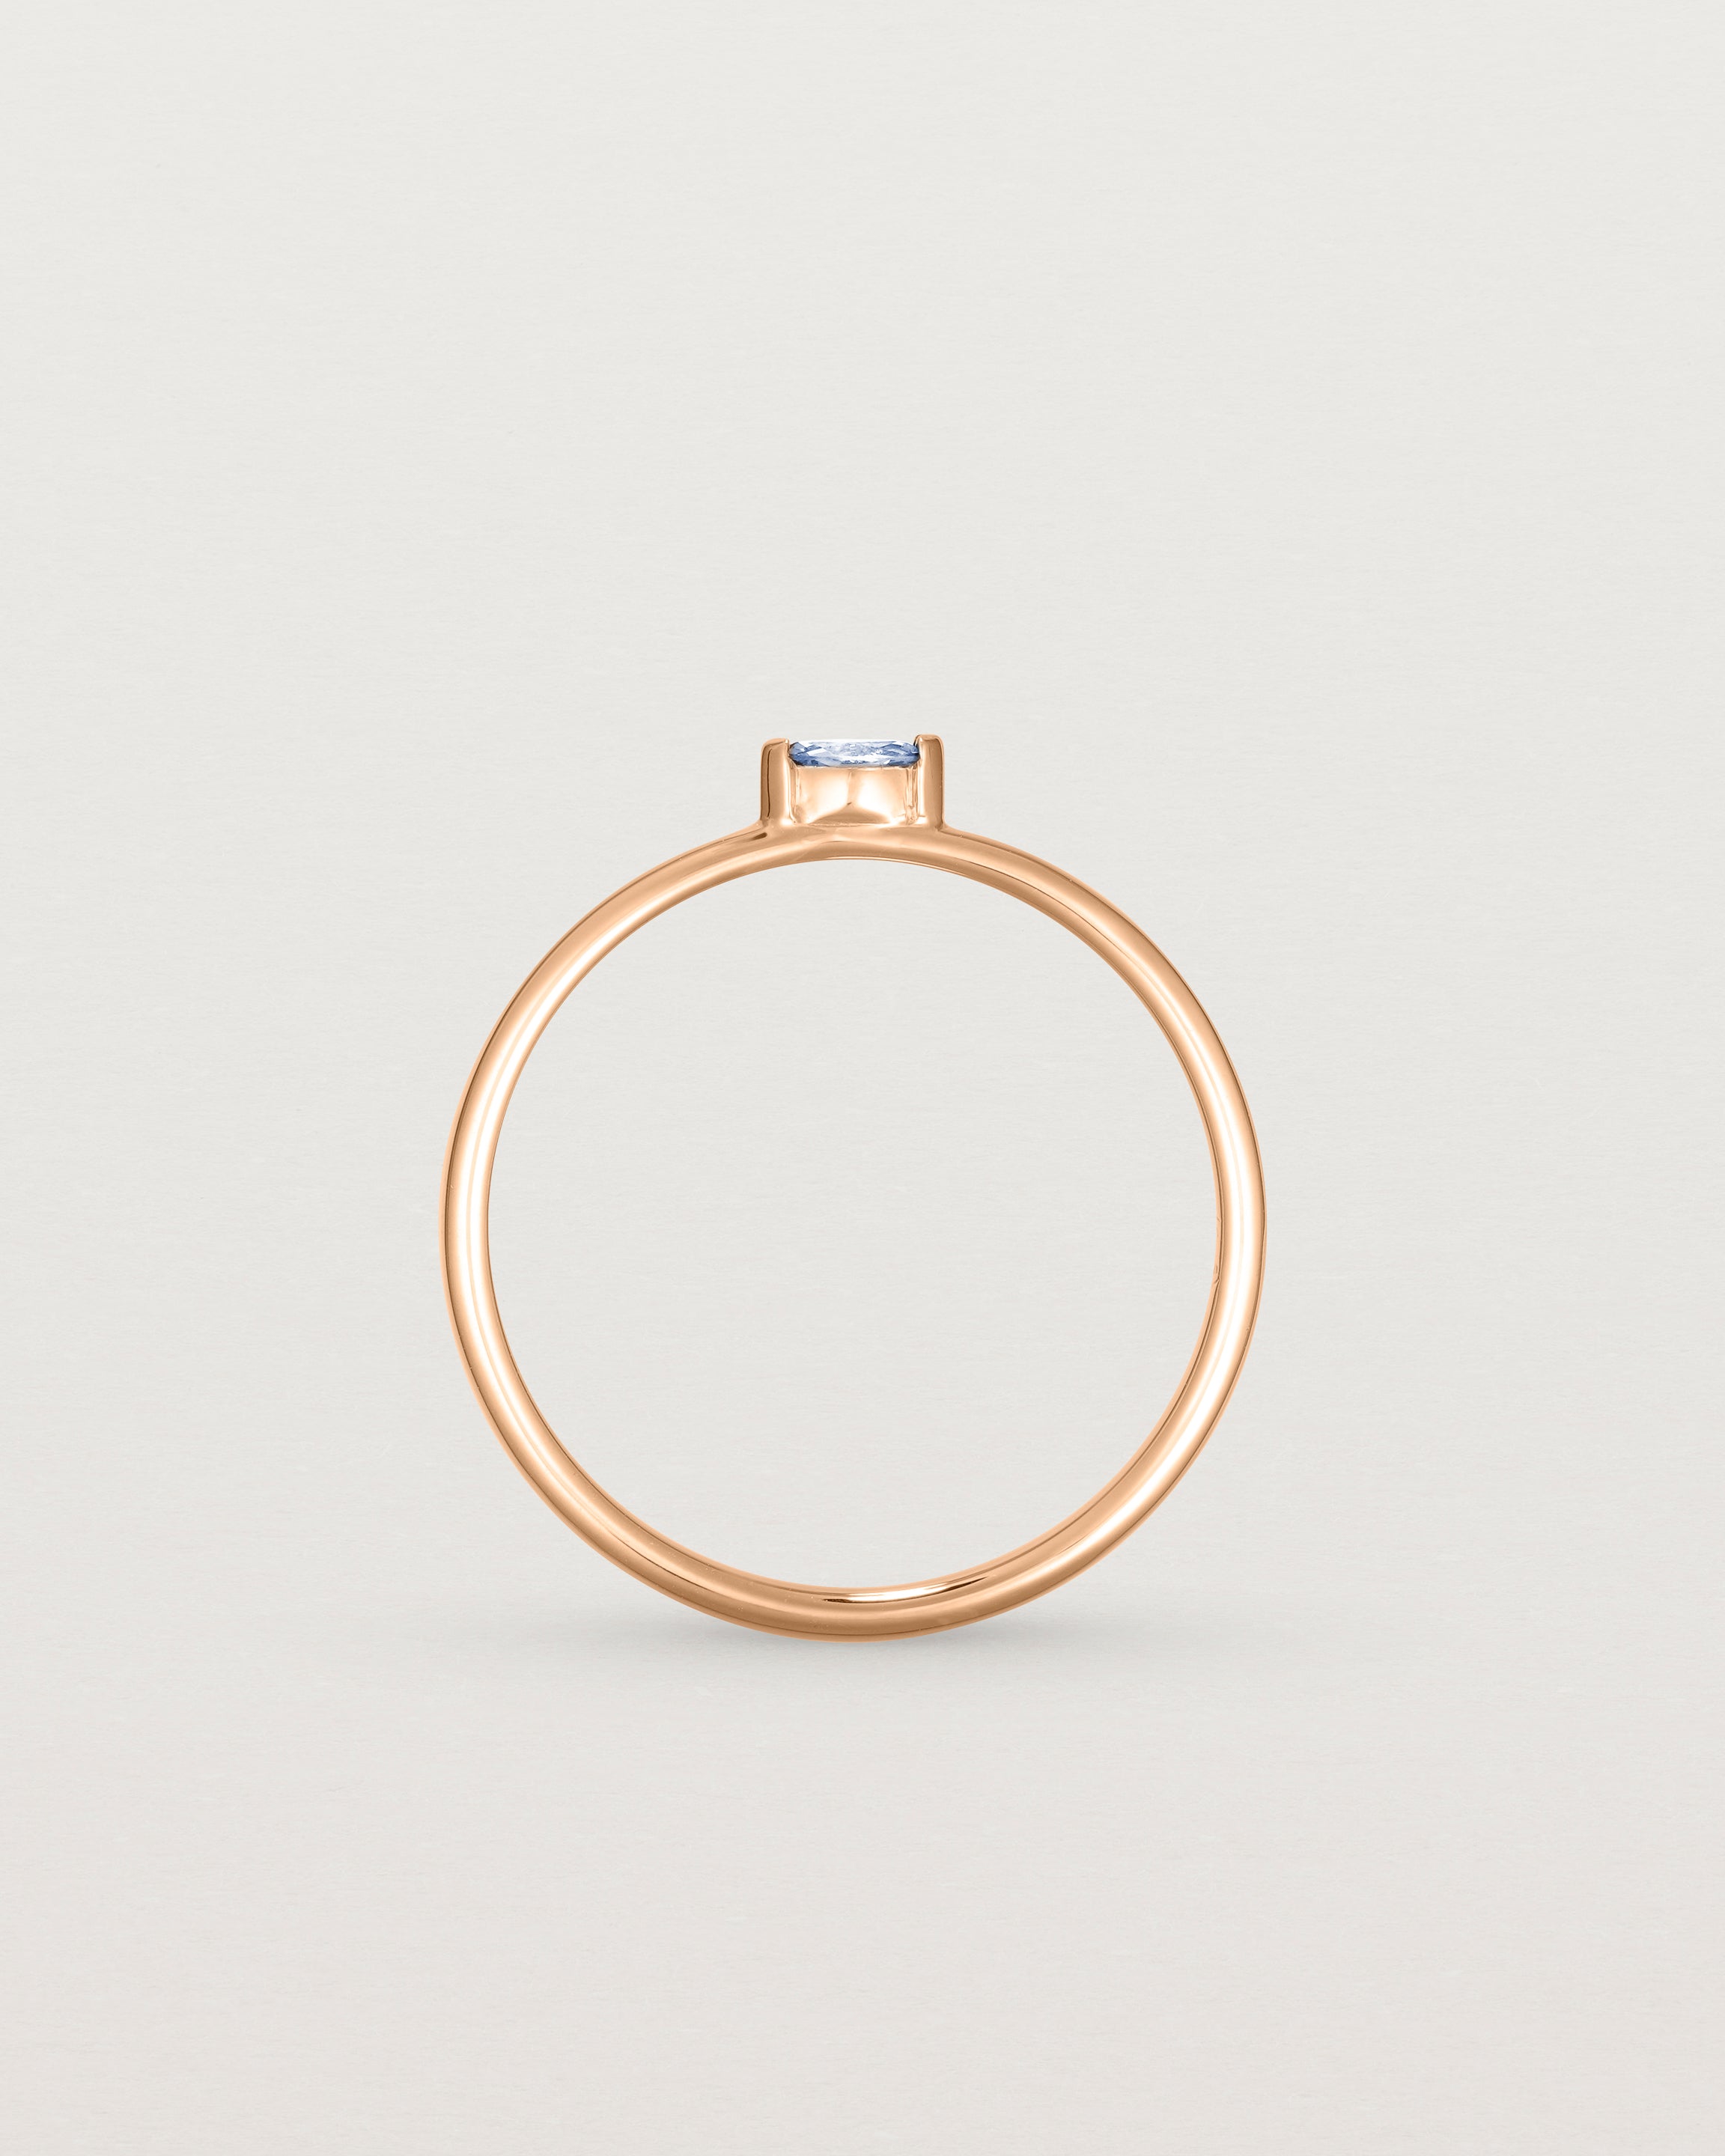 Standing view of the Vega Stacking Ring | Sapphire in rose gold.